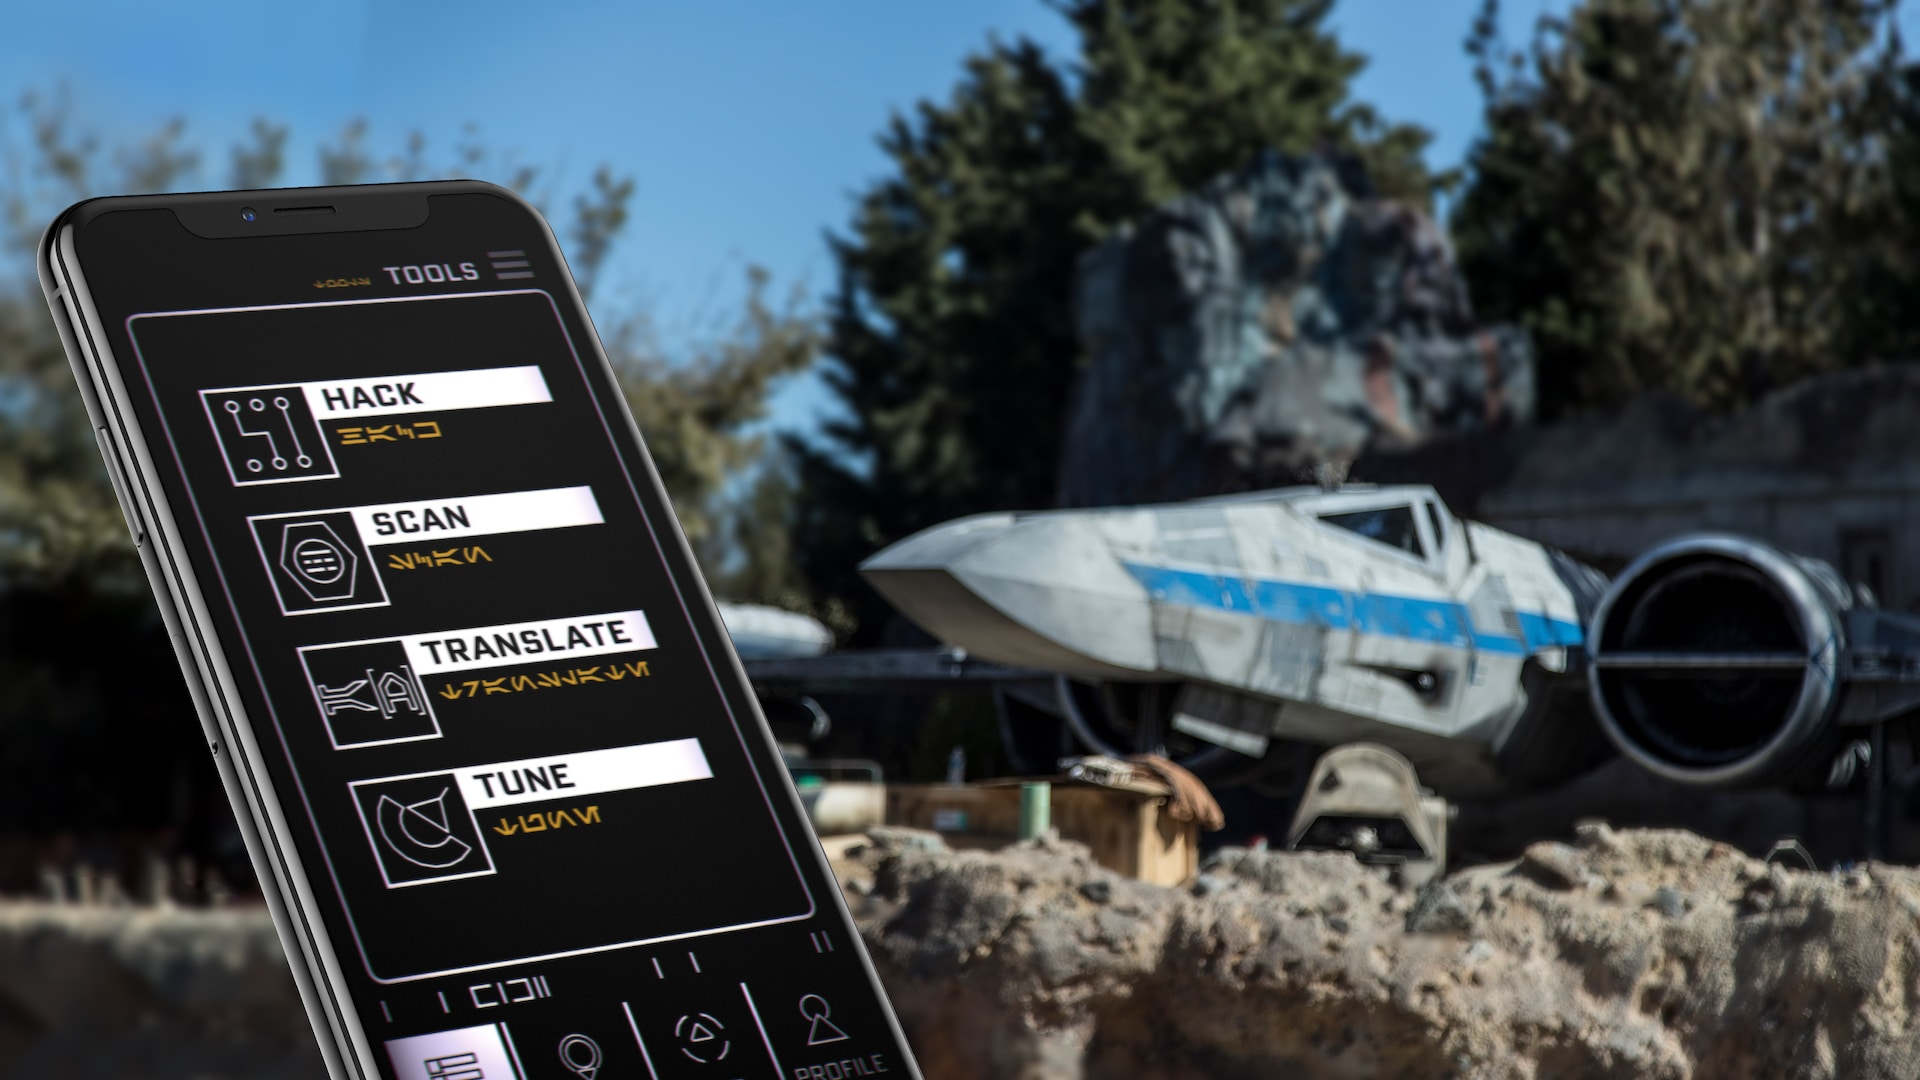 A galactic handheld mobile device displays symbols and characters in Aurebesh, a language used in Star Wars, as a starship looms nearby on the landing pad 